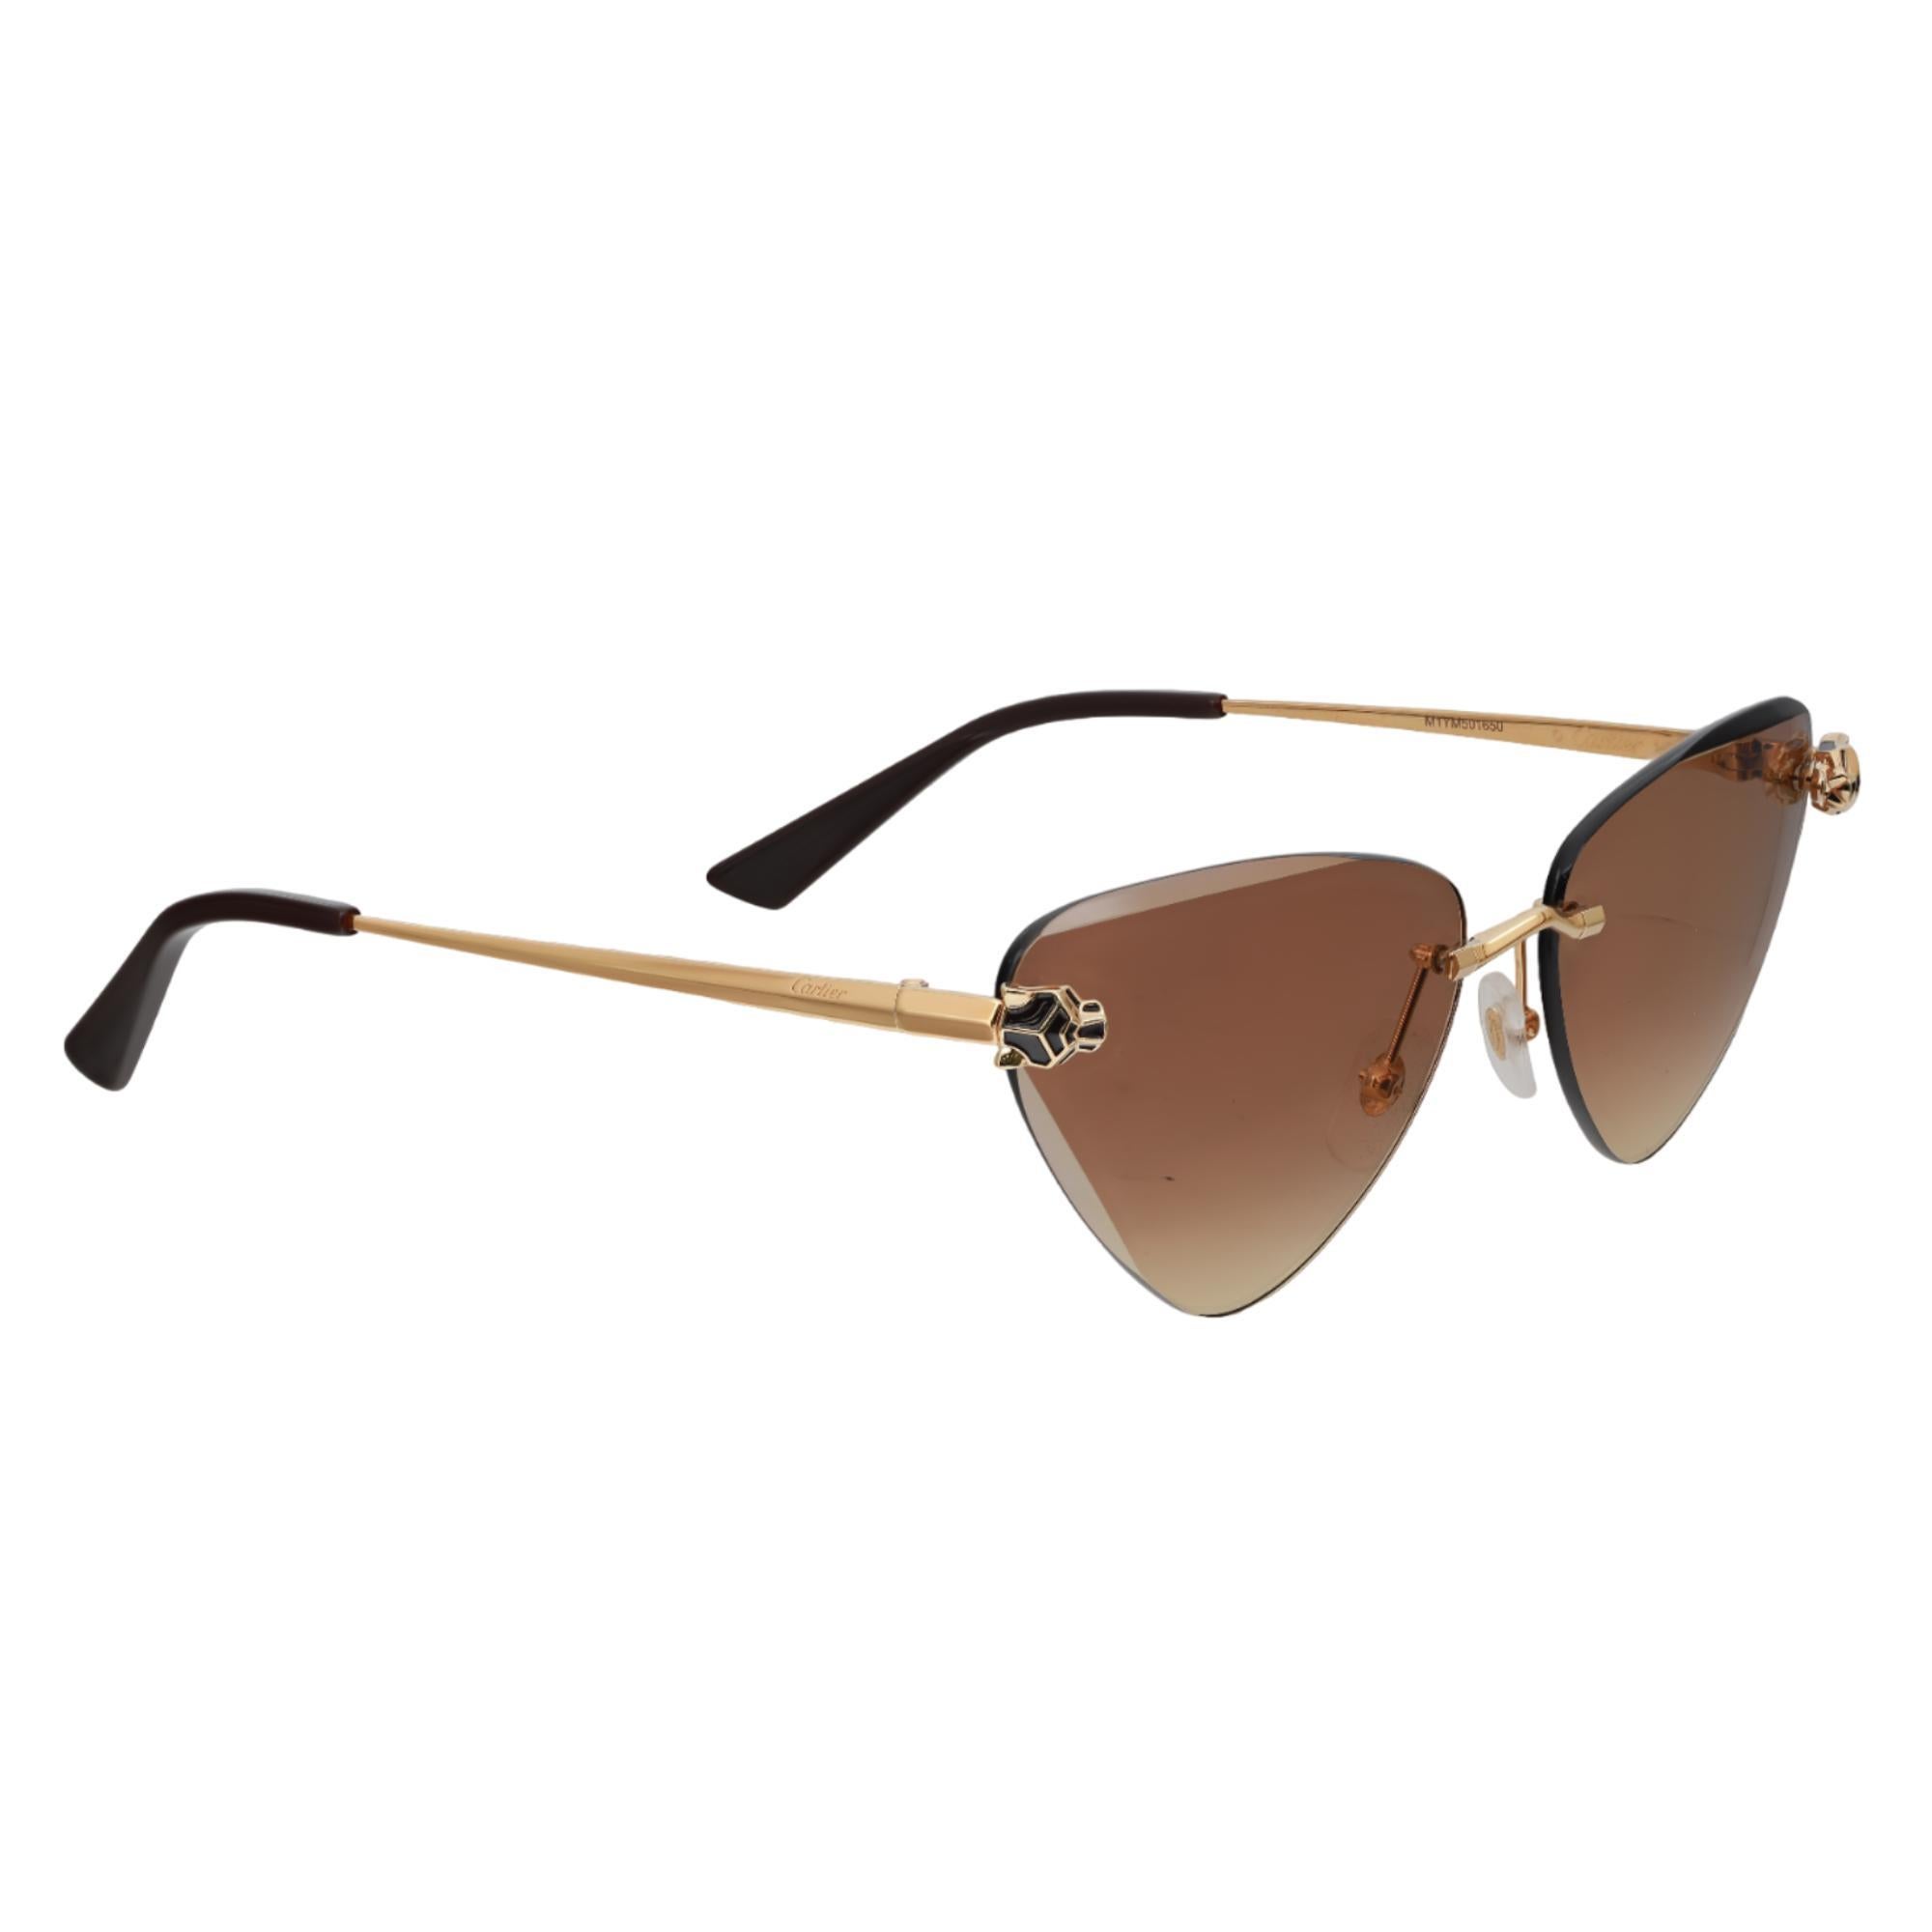 These chic and modern Cartier Panthere De Cartier sunglasses are the epitome of sheer elegance. These sunglasses are crafted in a non-rimmed metal frame with a smooth golden finish for the style-savvy people of today. Showcasing UV-protected plastic